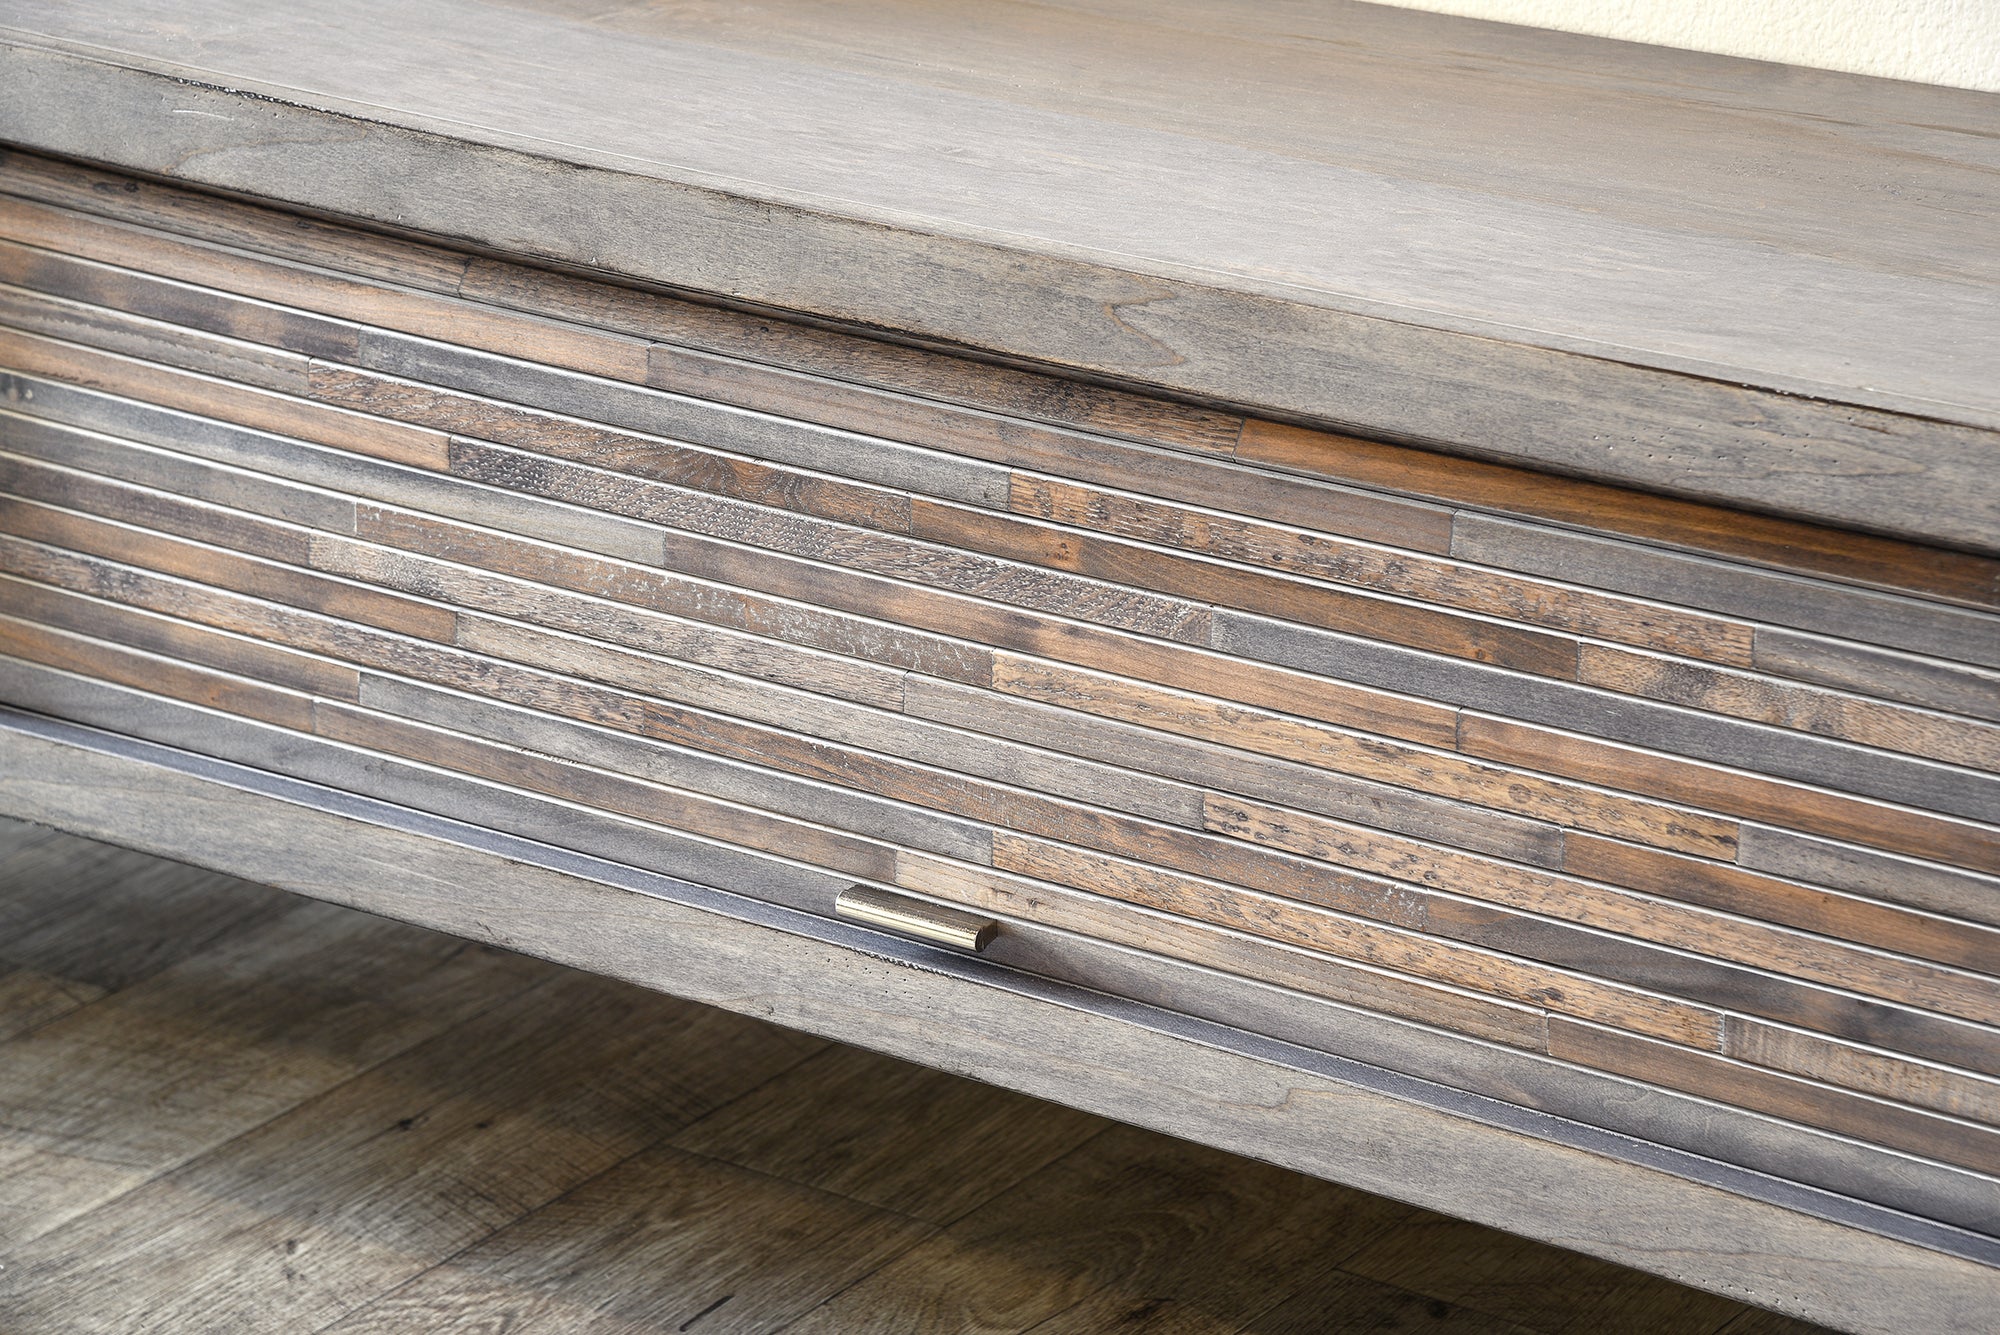 Floating TV Stand - Woodwaves - Floating Entertainment Center - ECO GEO Collection - Lakewood Gray